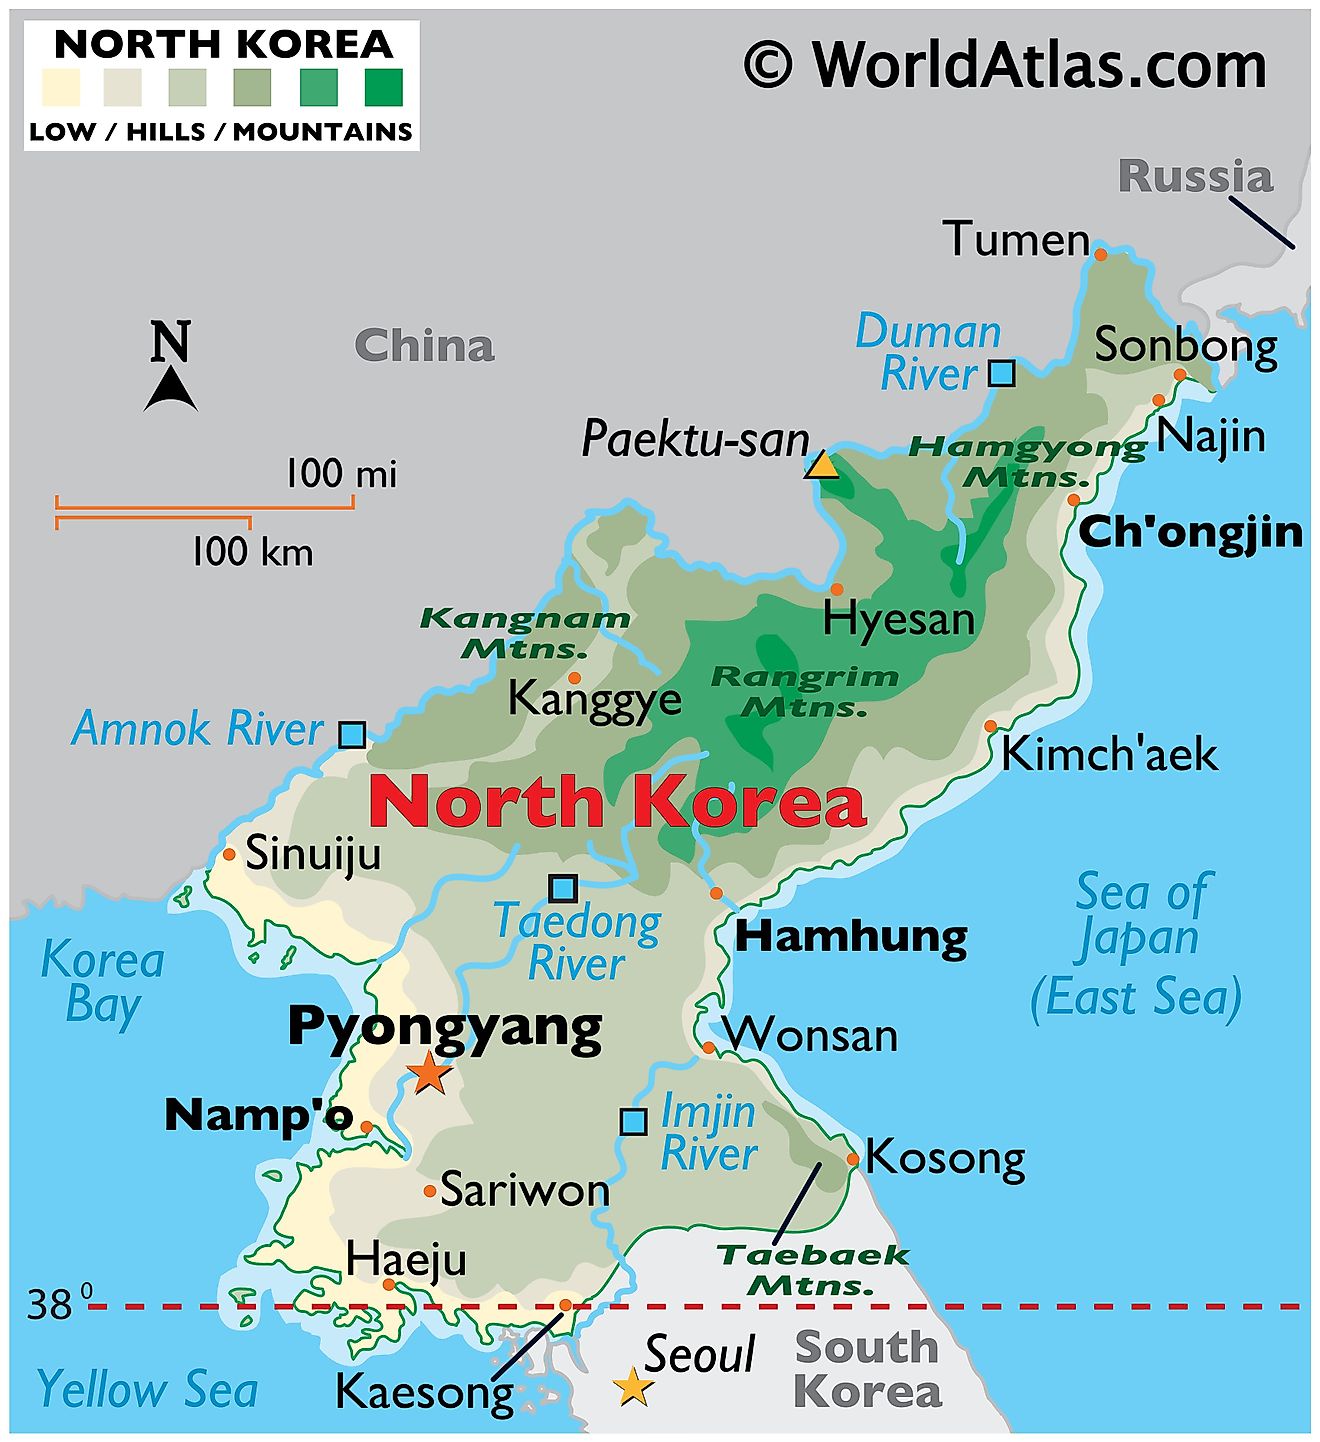 Physical Map of North Korea showing relief, highest point, major mountain ranges, rivers, important urban centres, etc.